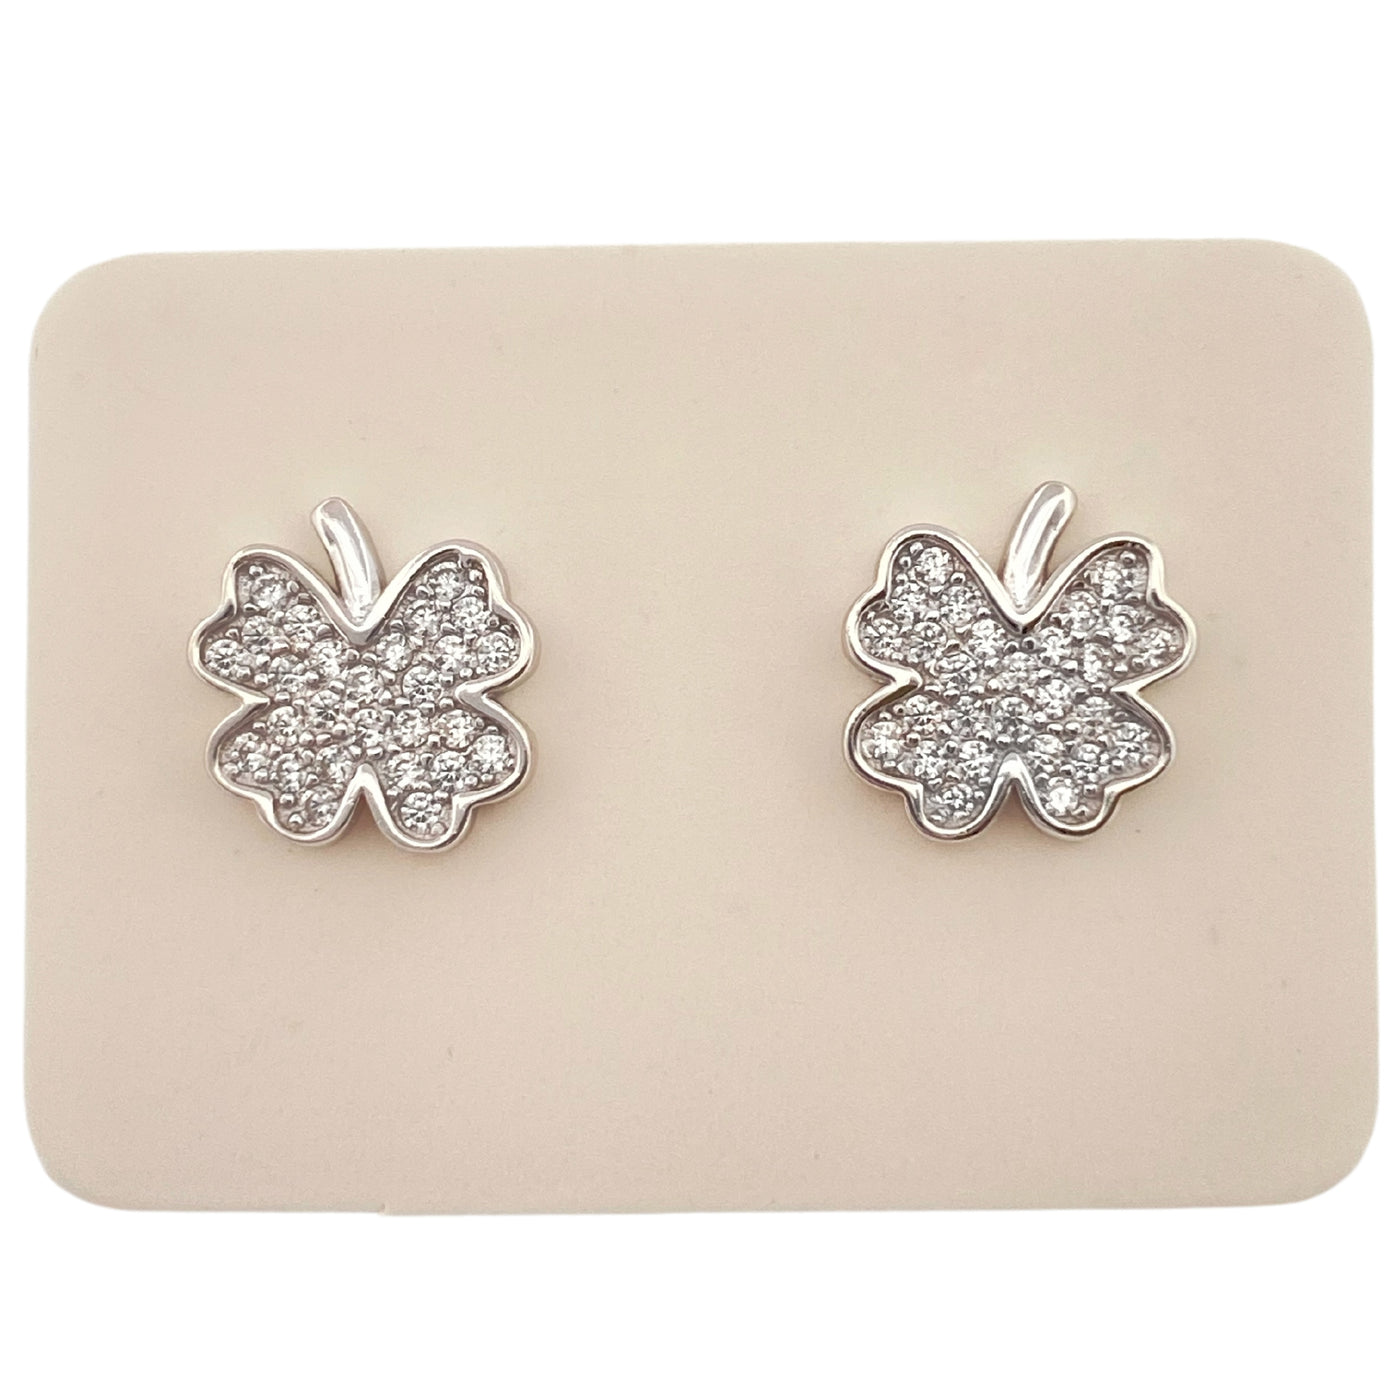 Pack of 5 silver 4-leaf stud earrings with zirconia - 9 mm